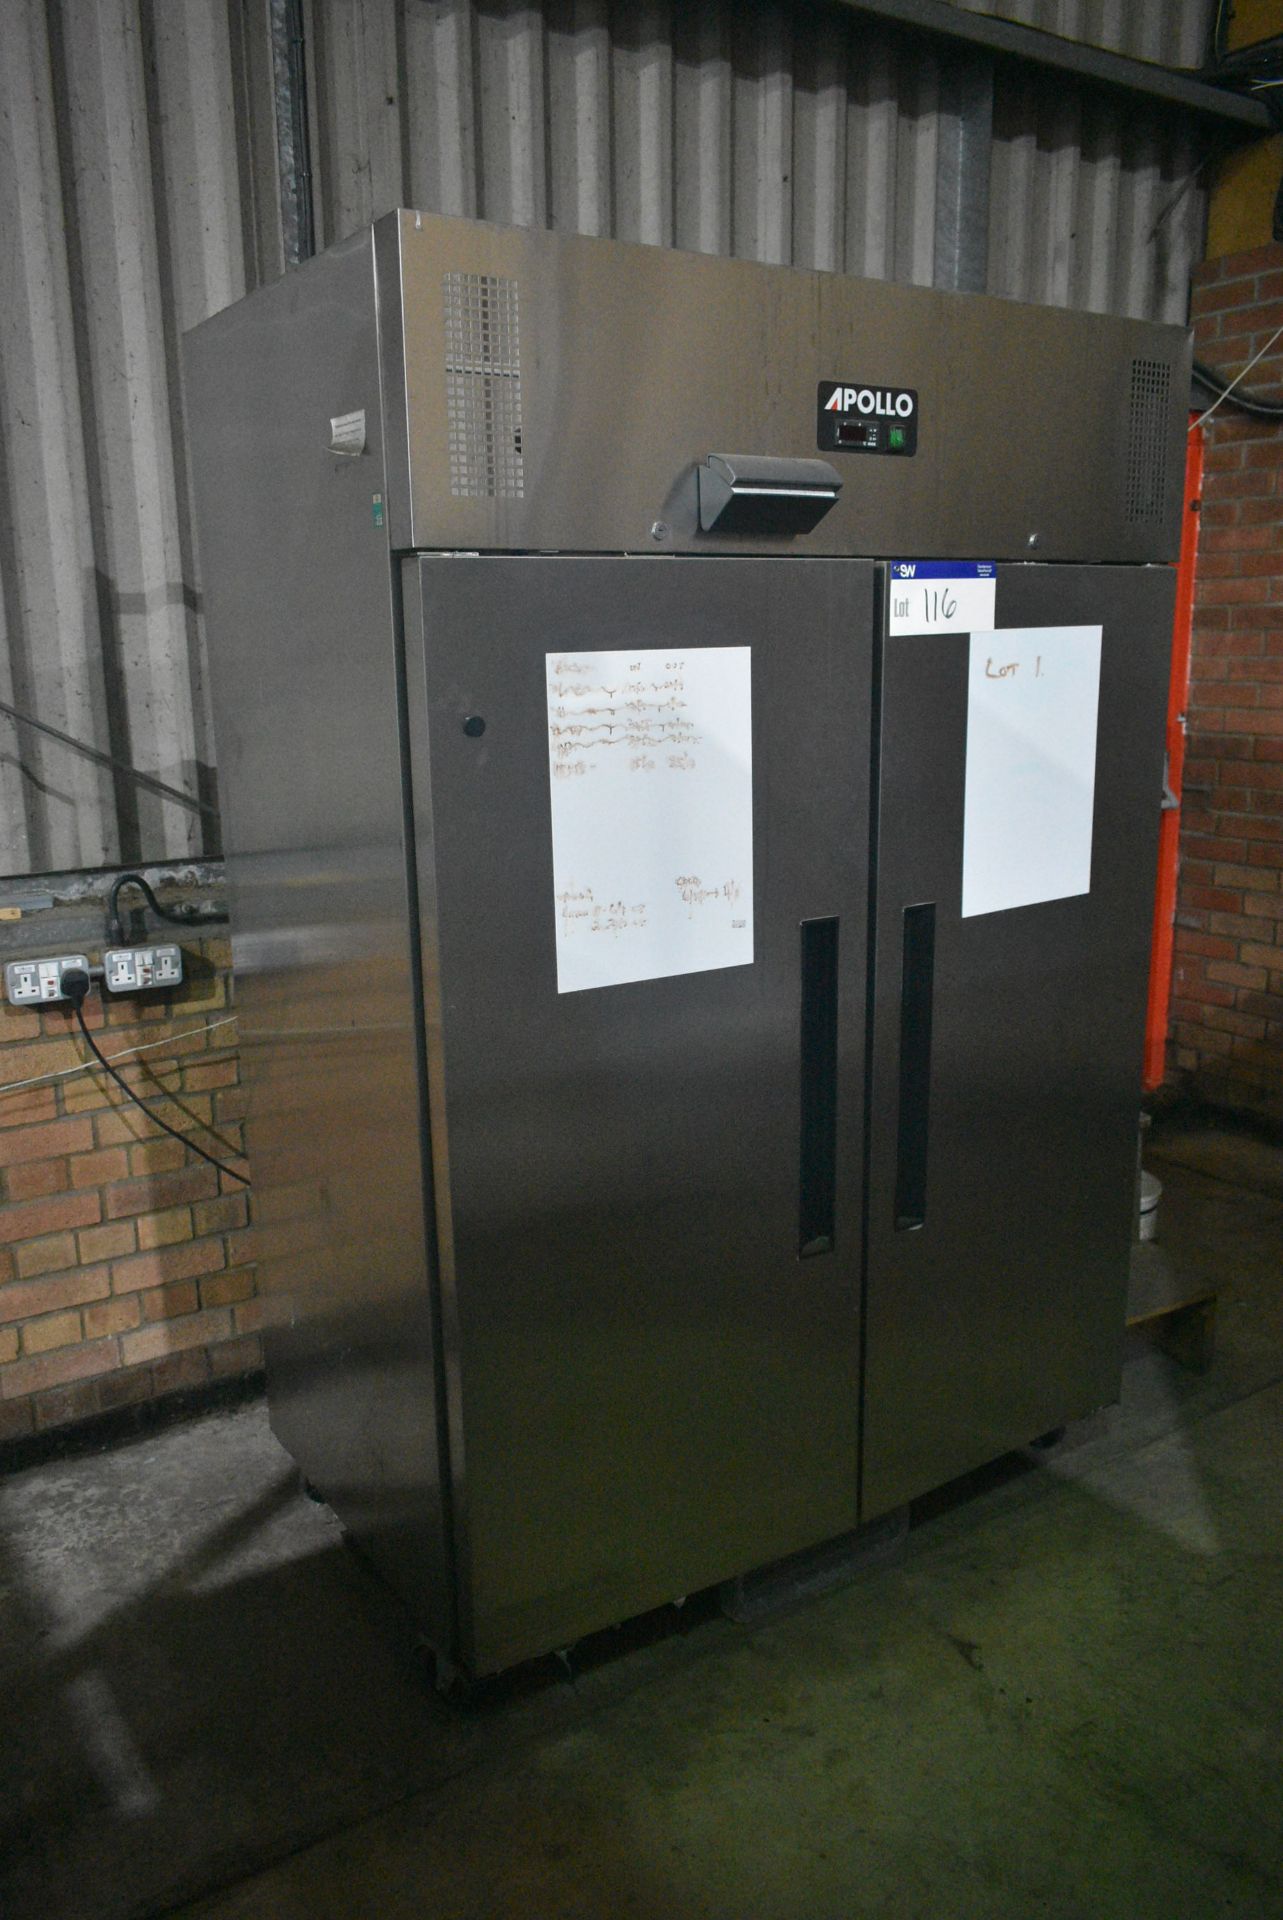 Apollo ADR1200 DOUBLE DOOR REFRIGERATOR, internal dimensions approx. 1.2m x 650mm x 1.4m high ( - Image 2 of 5